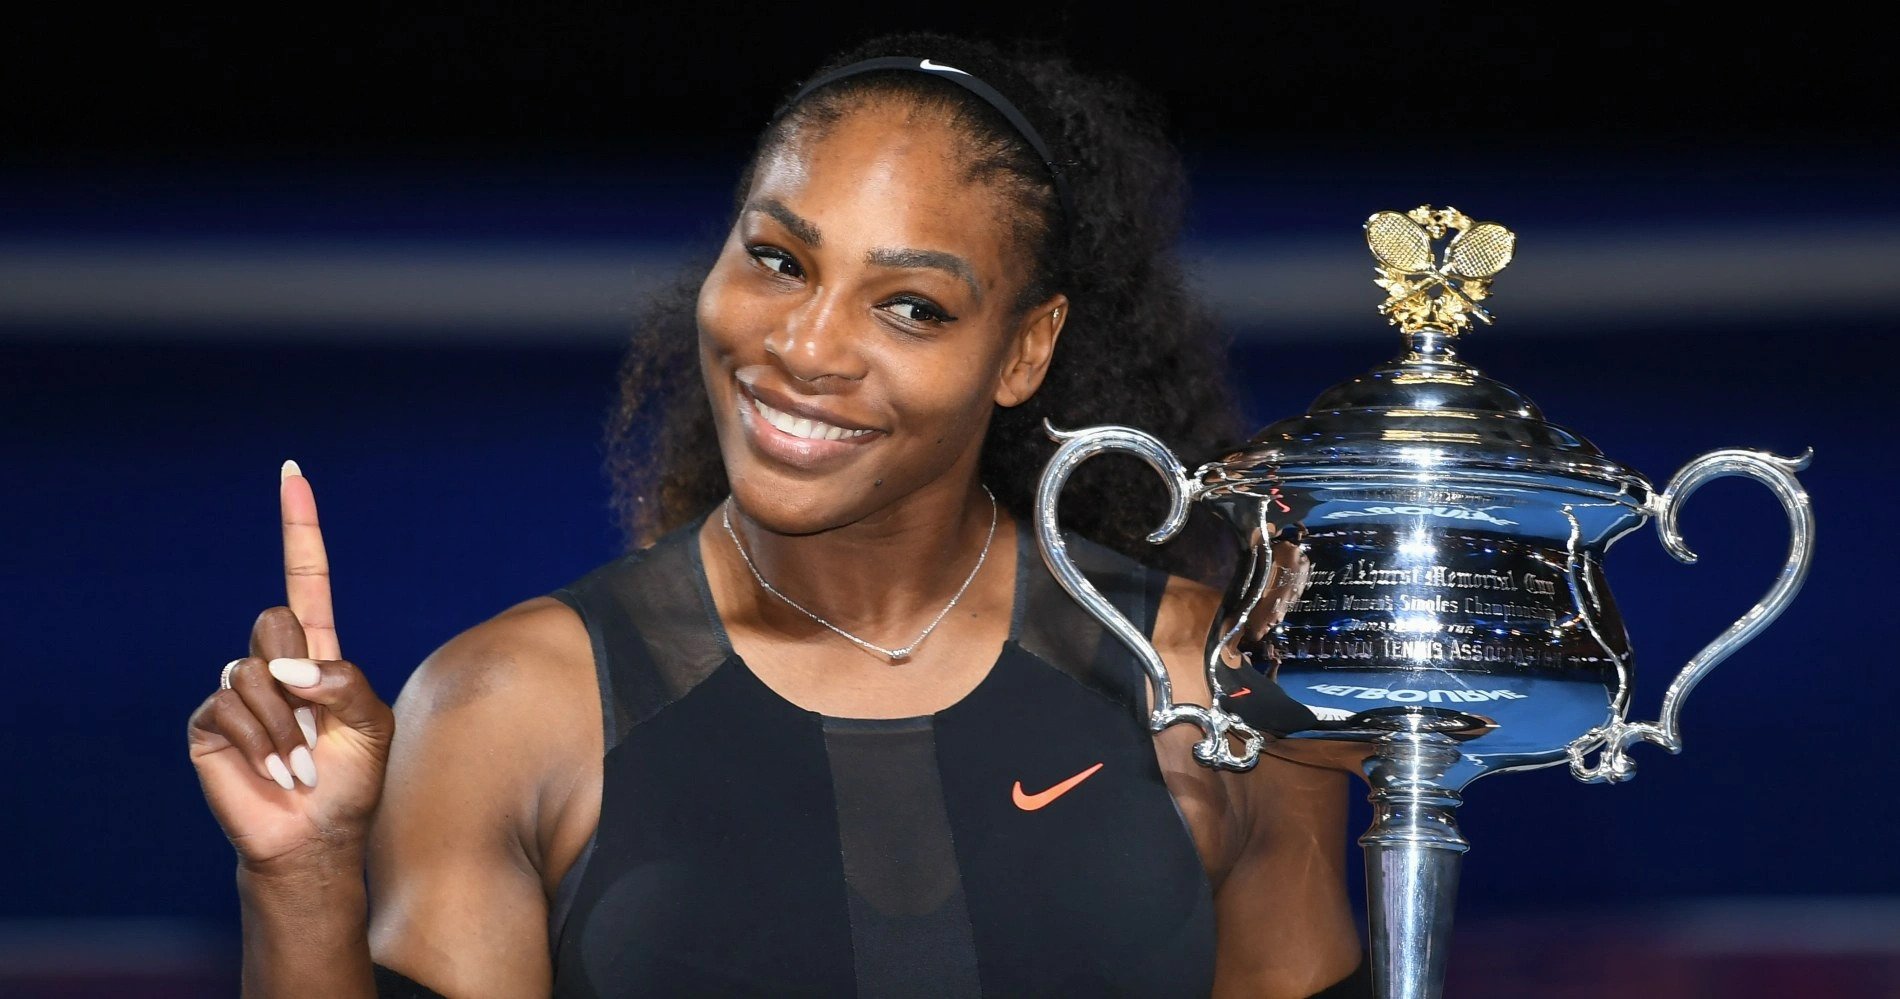 35 Facts about Serena Williams - Facts.net